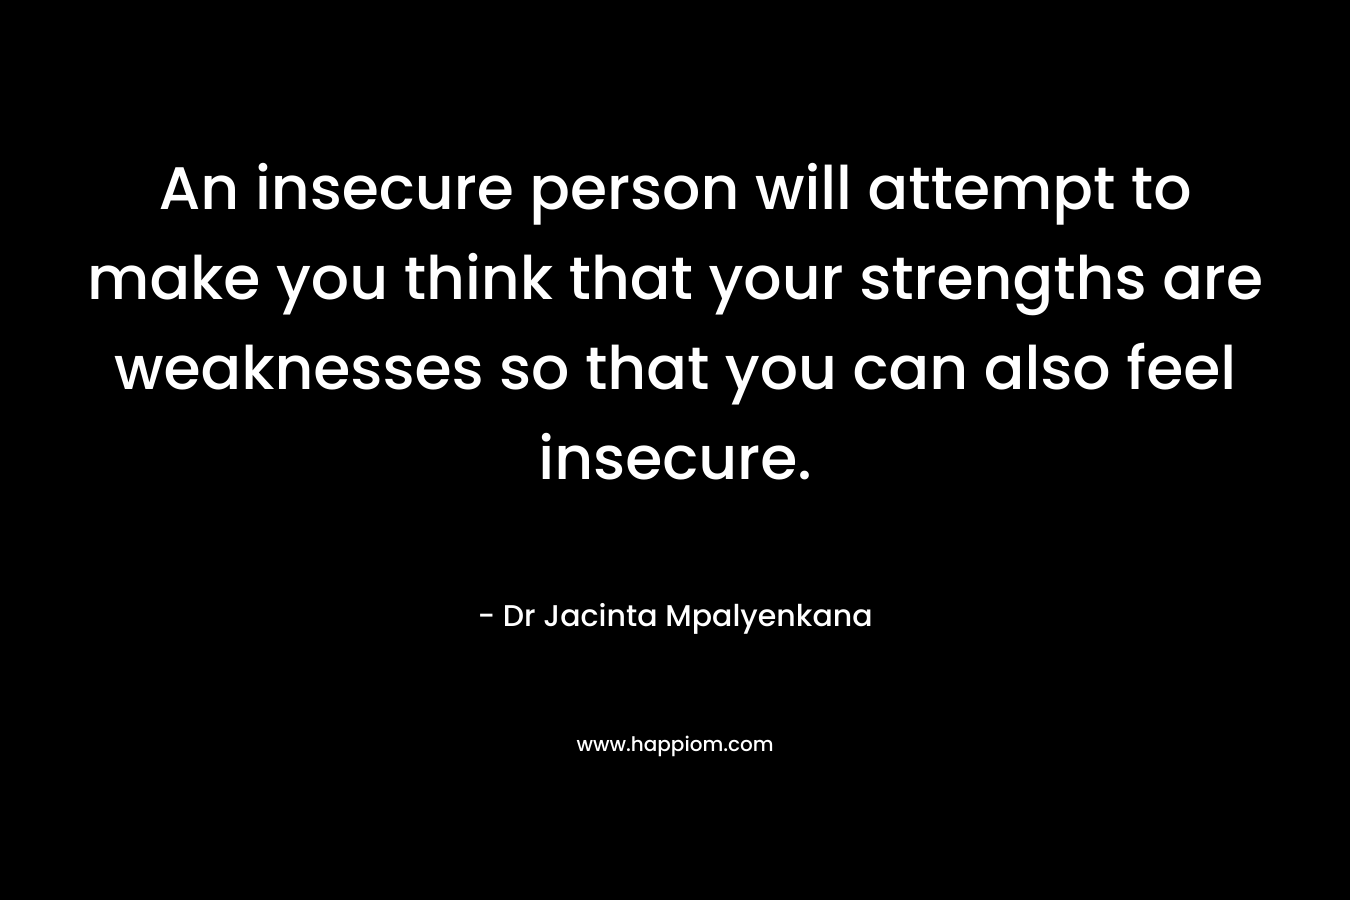 An insecure person will attempt to make you think that your strengths are weaknesses so that you can also feel insecure. – Dr Jacinta Mpalyenkana